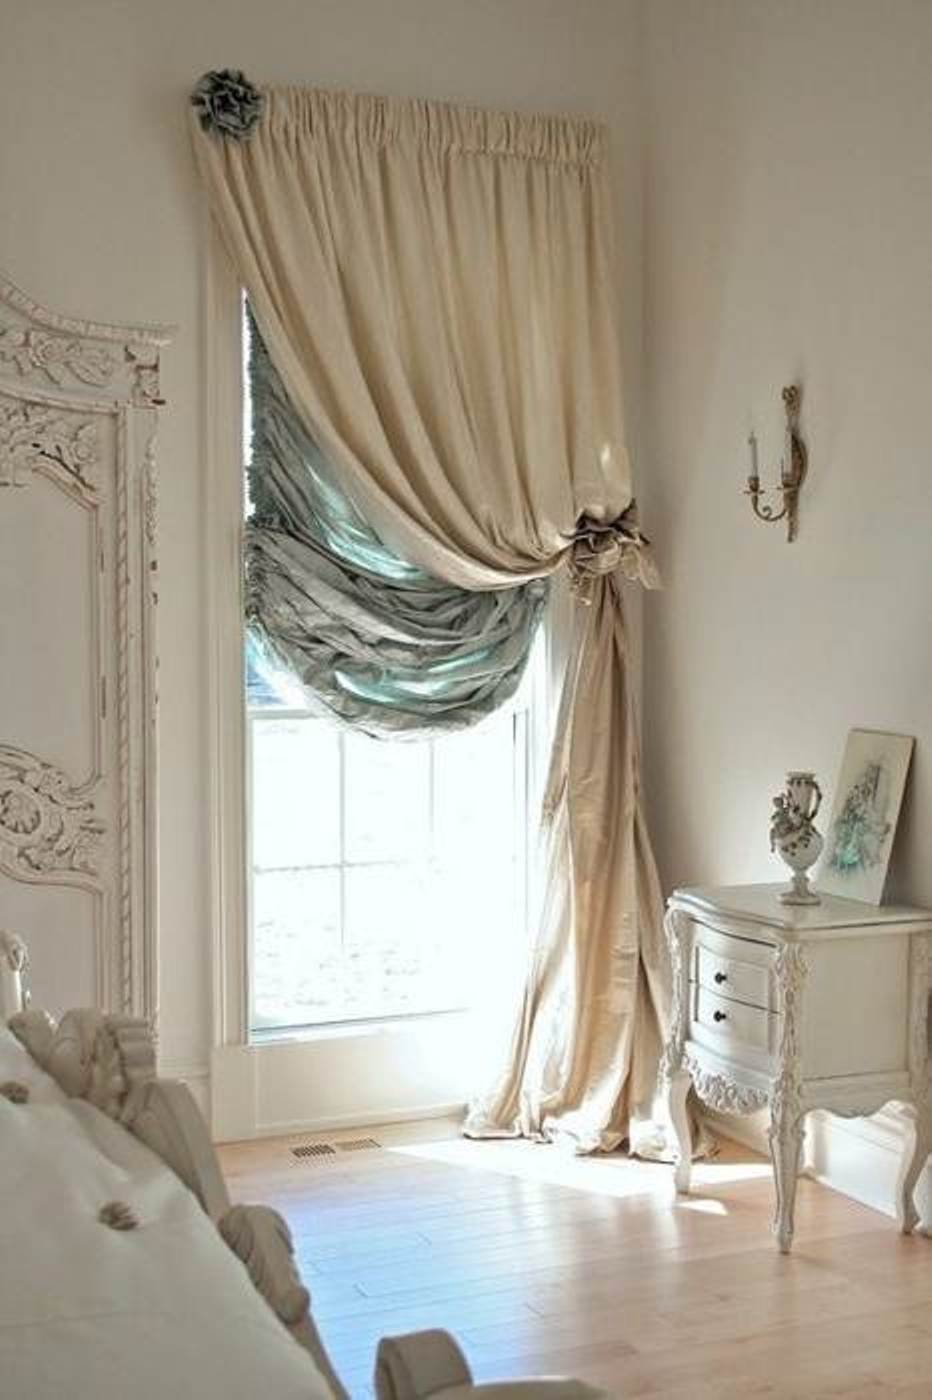 Incredible Idea For Curtain Charming Pretty Bedroom 19 Theme Sofa Exquisite  6 Beautiful White In Living Room And Blind Large Window Small That Are Too  Long